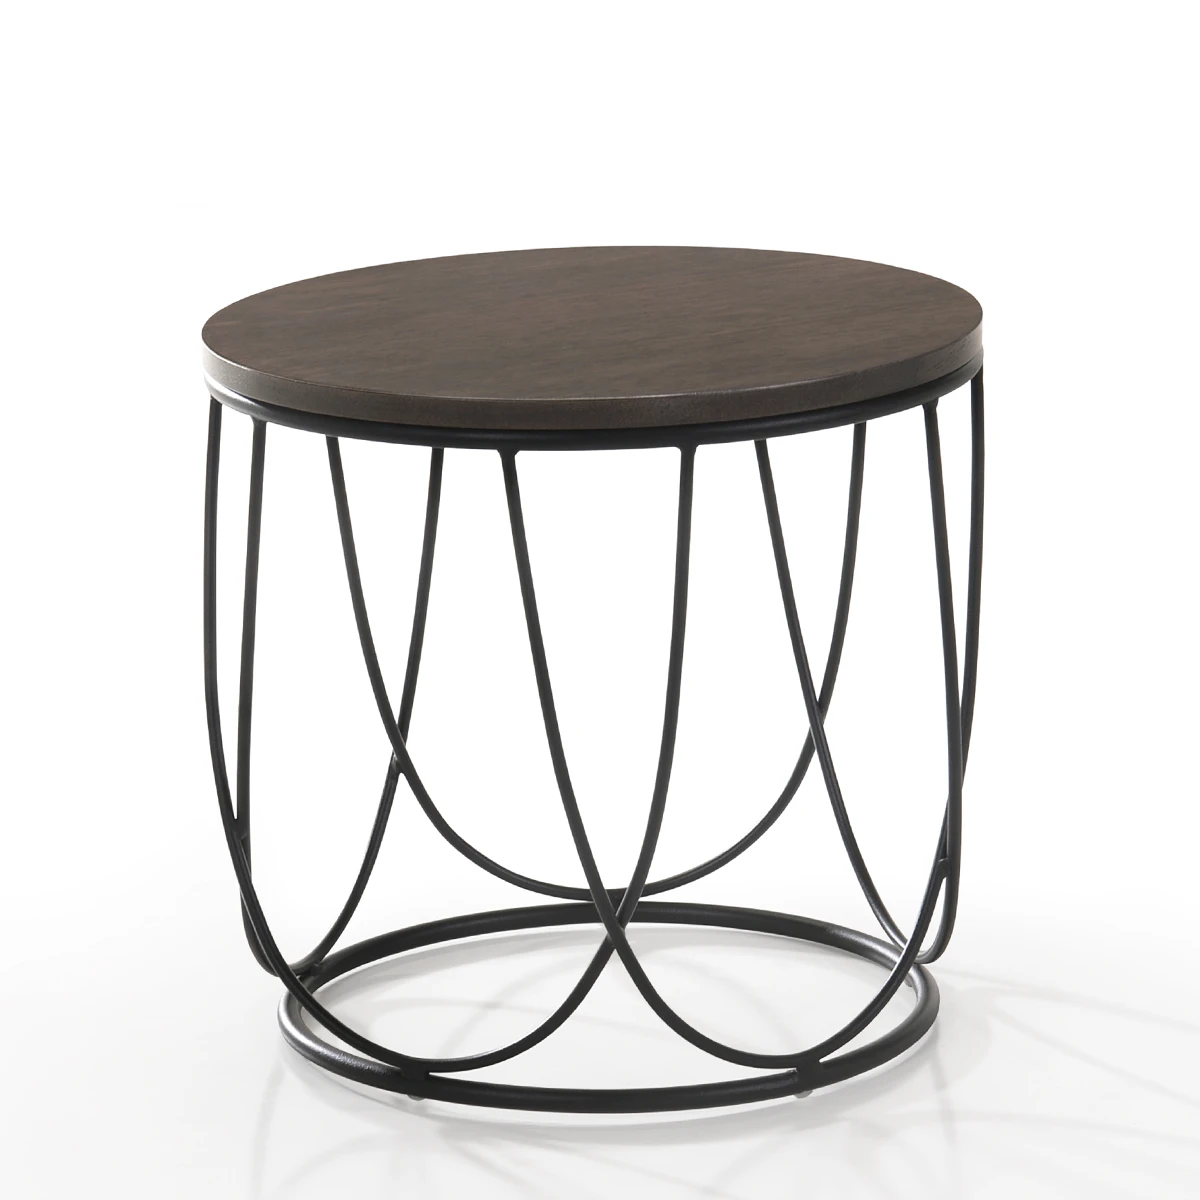 Iron ANd Wood Storage Dining Table Customize Products Home Furniture Dinning Room Furniture Center Table Modern Table